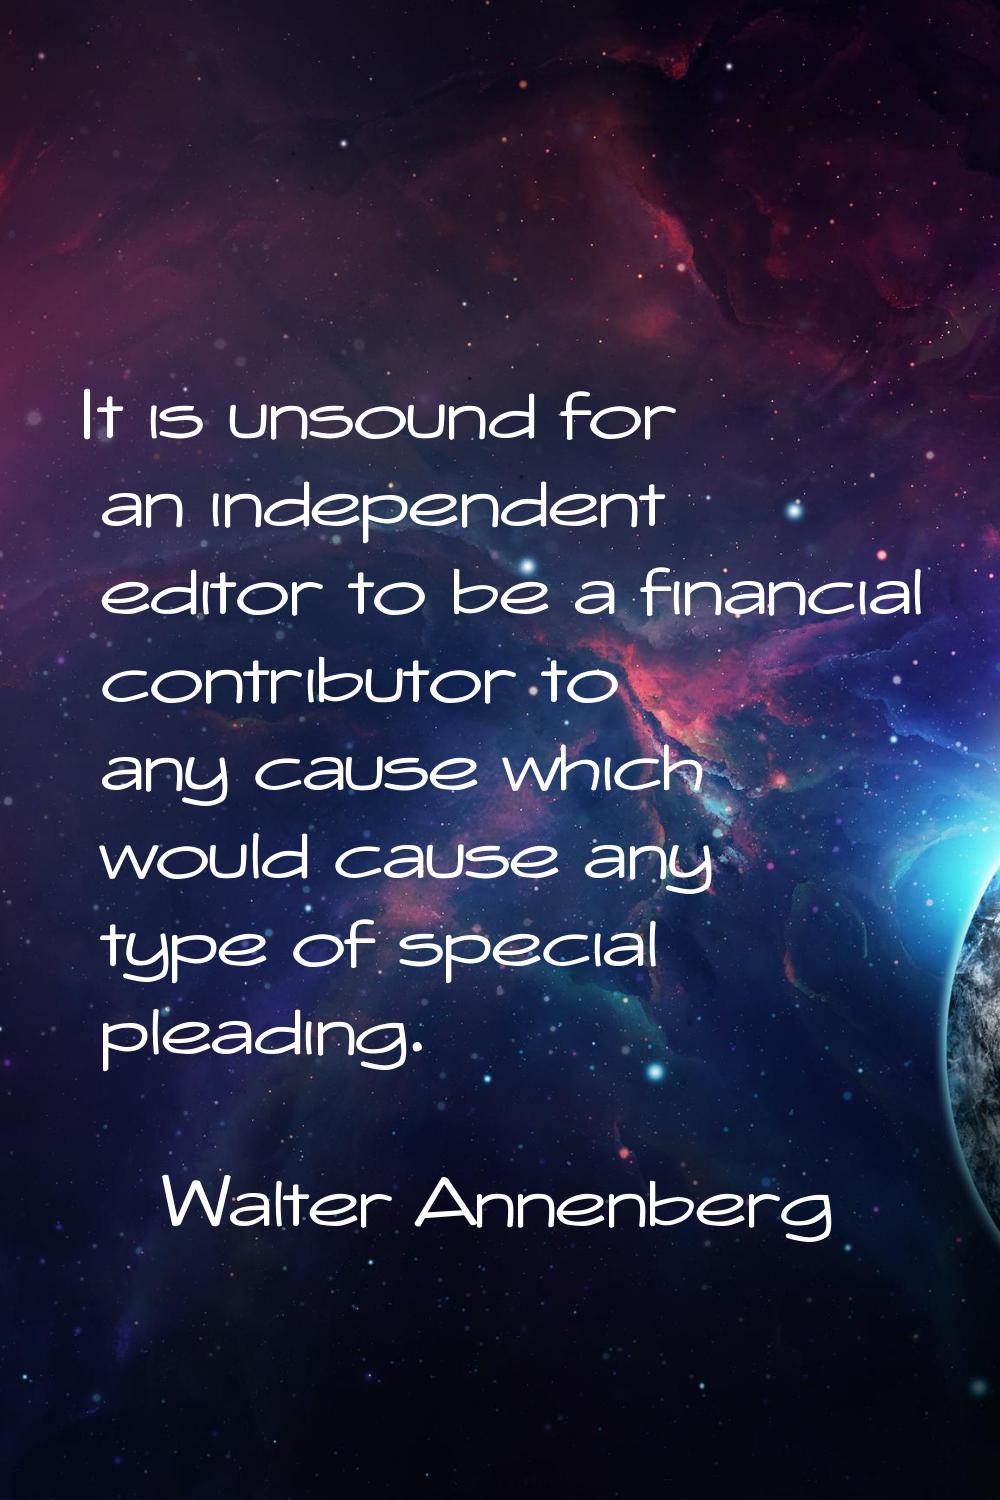 It is unsound for an independent editor to be a financial contributor to any cause which would caus